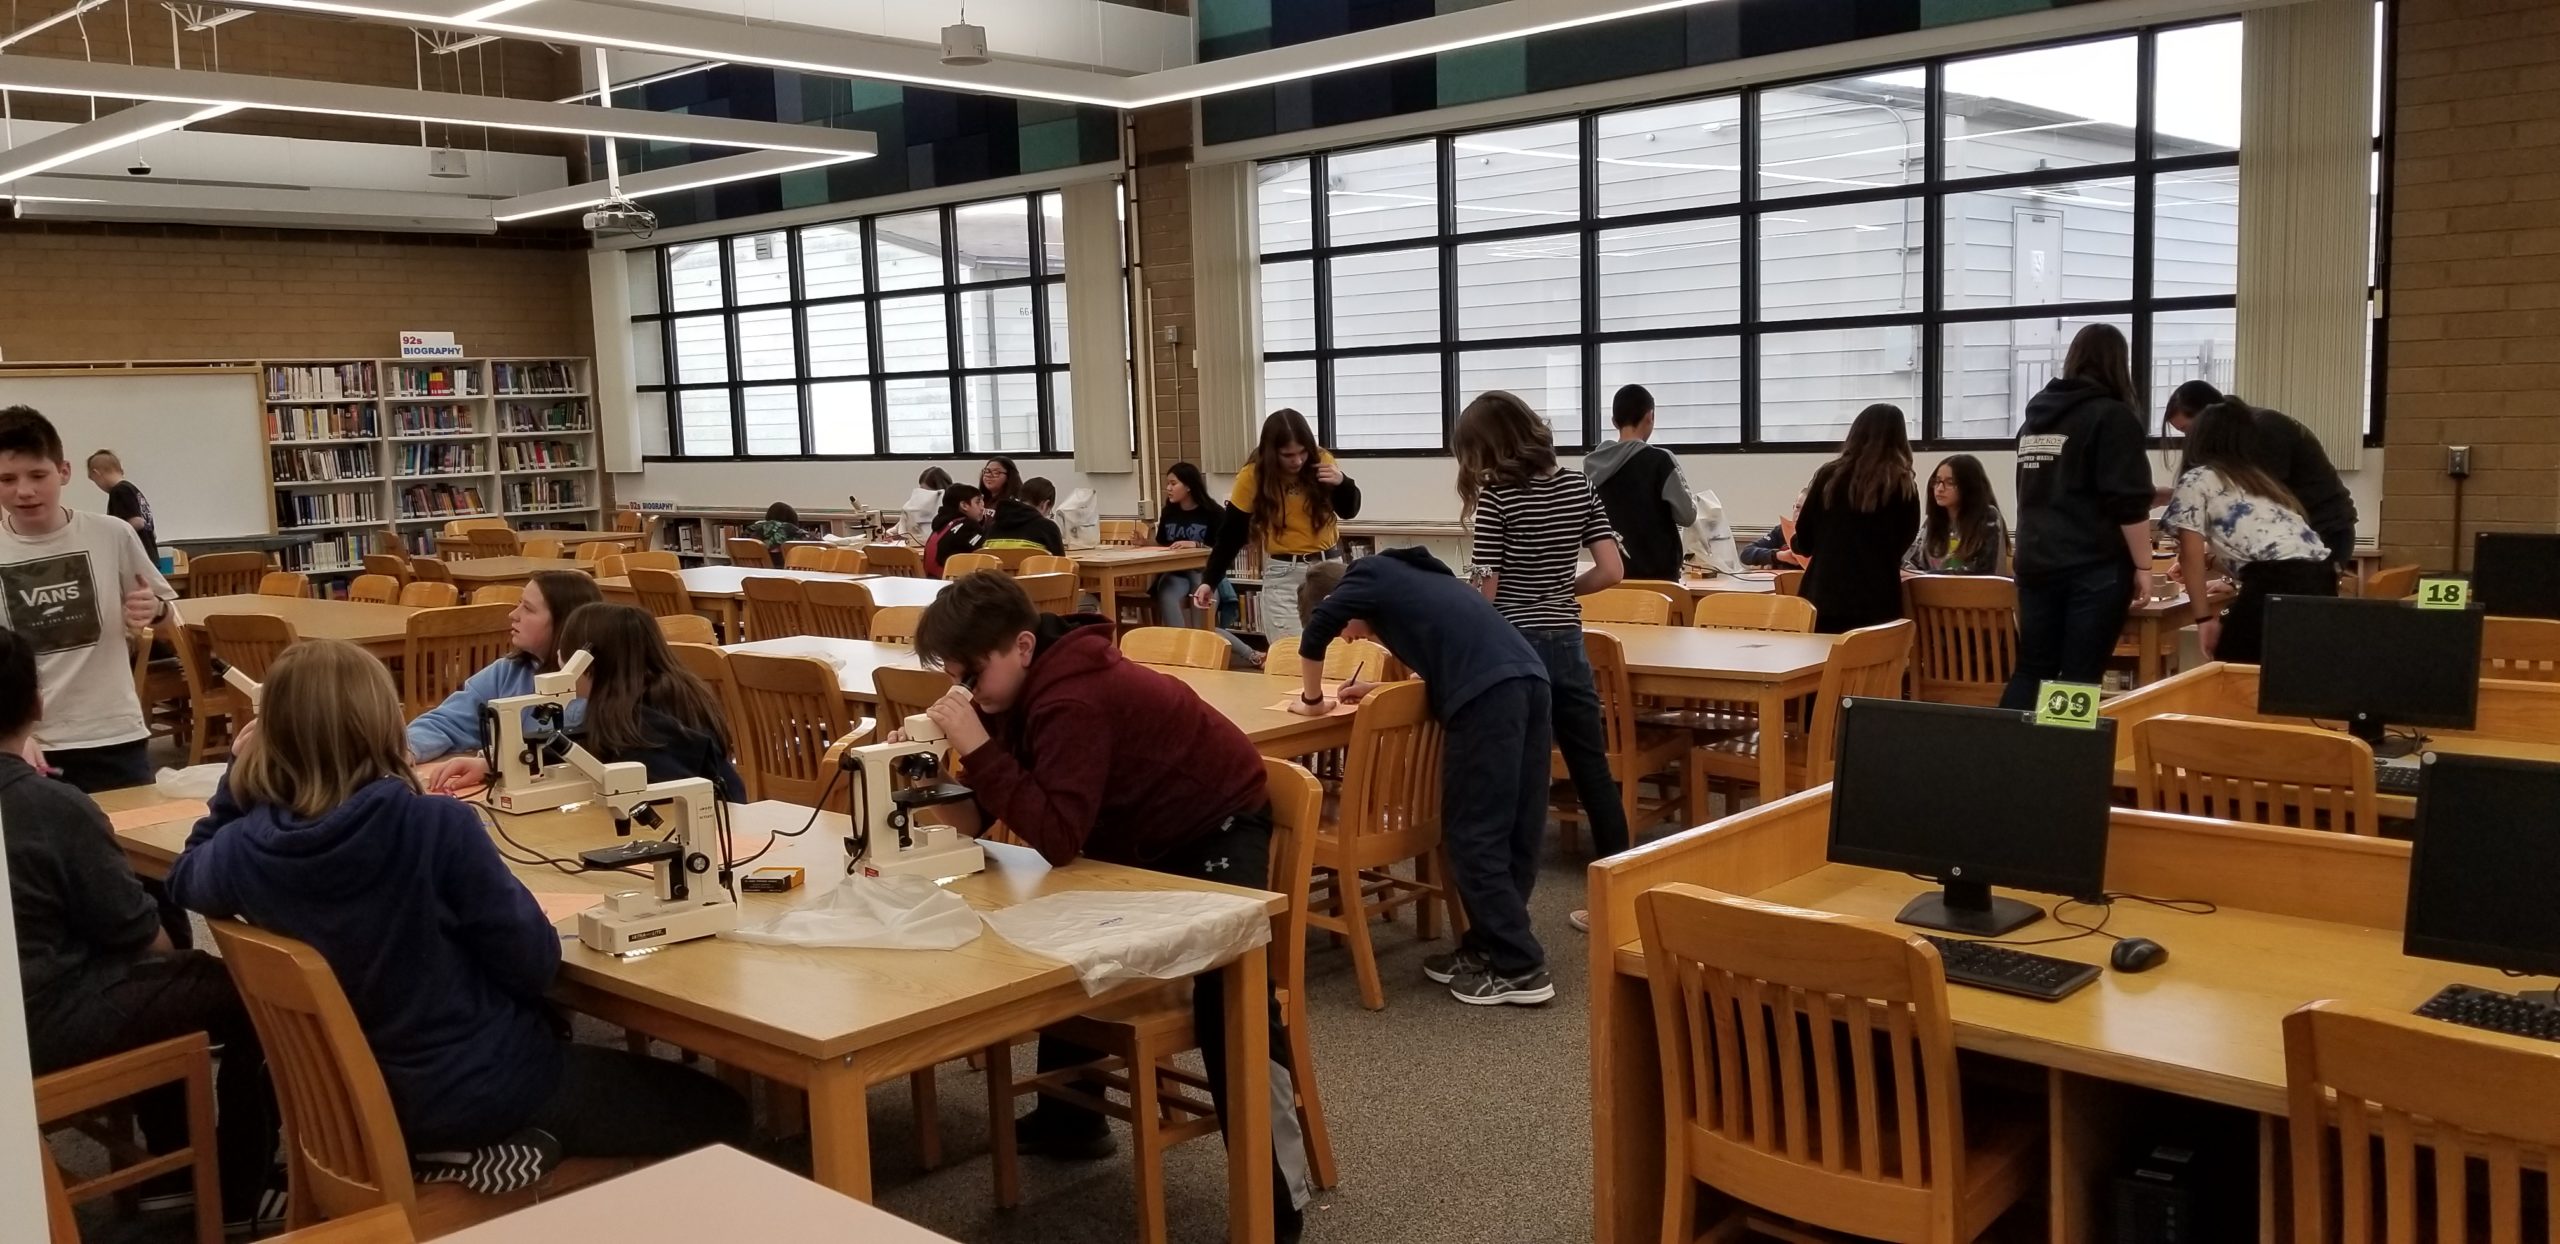 Students engaged in a hands-on lesson at the tables in the Library Media Center.